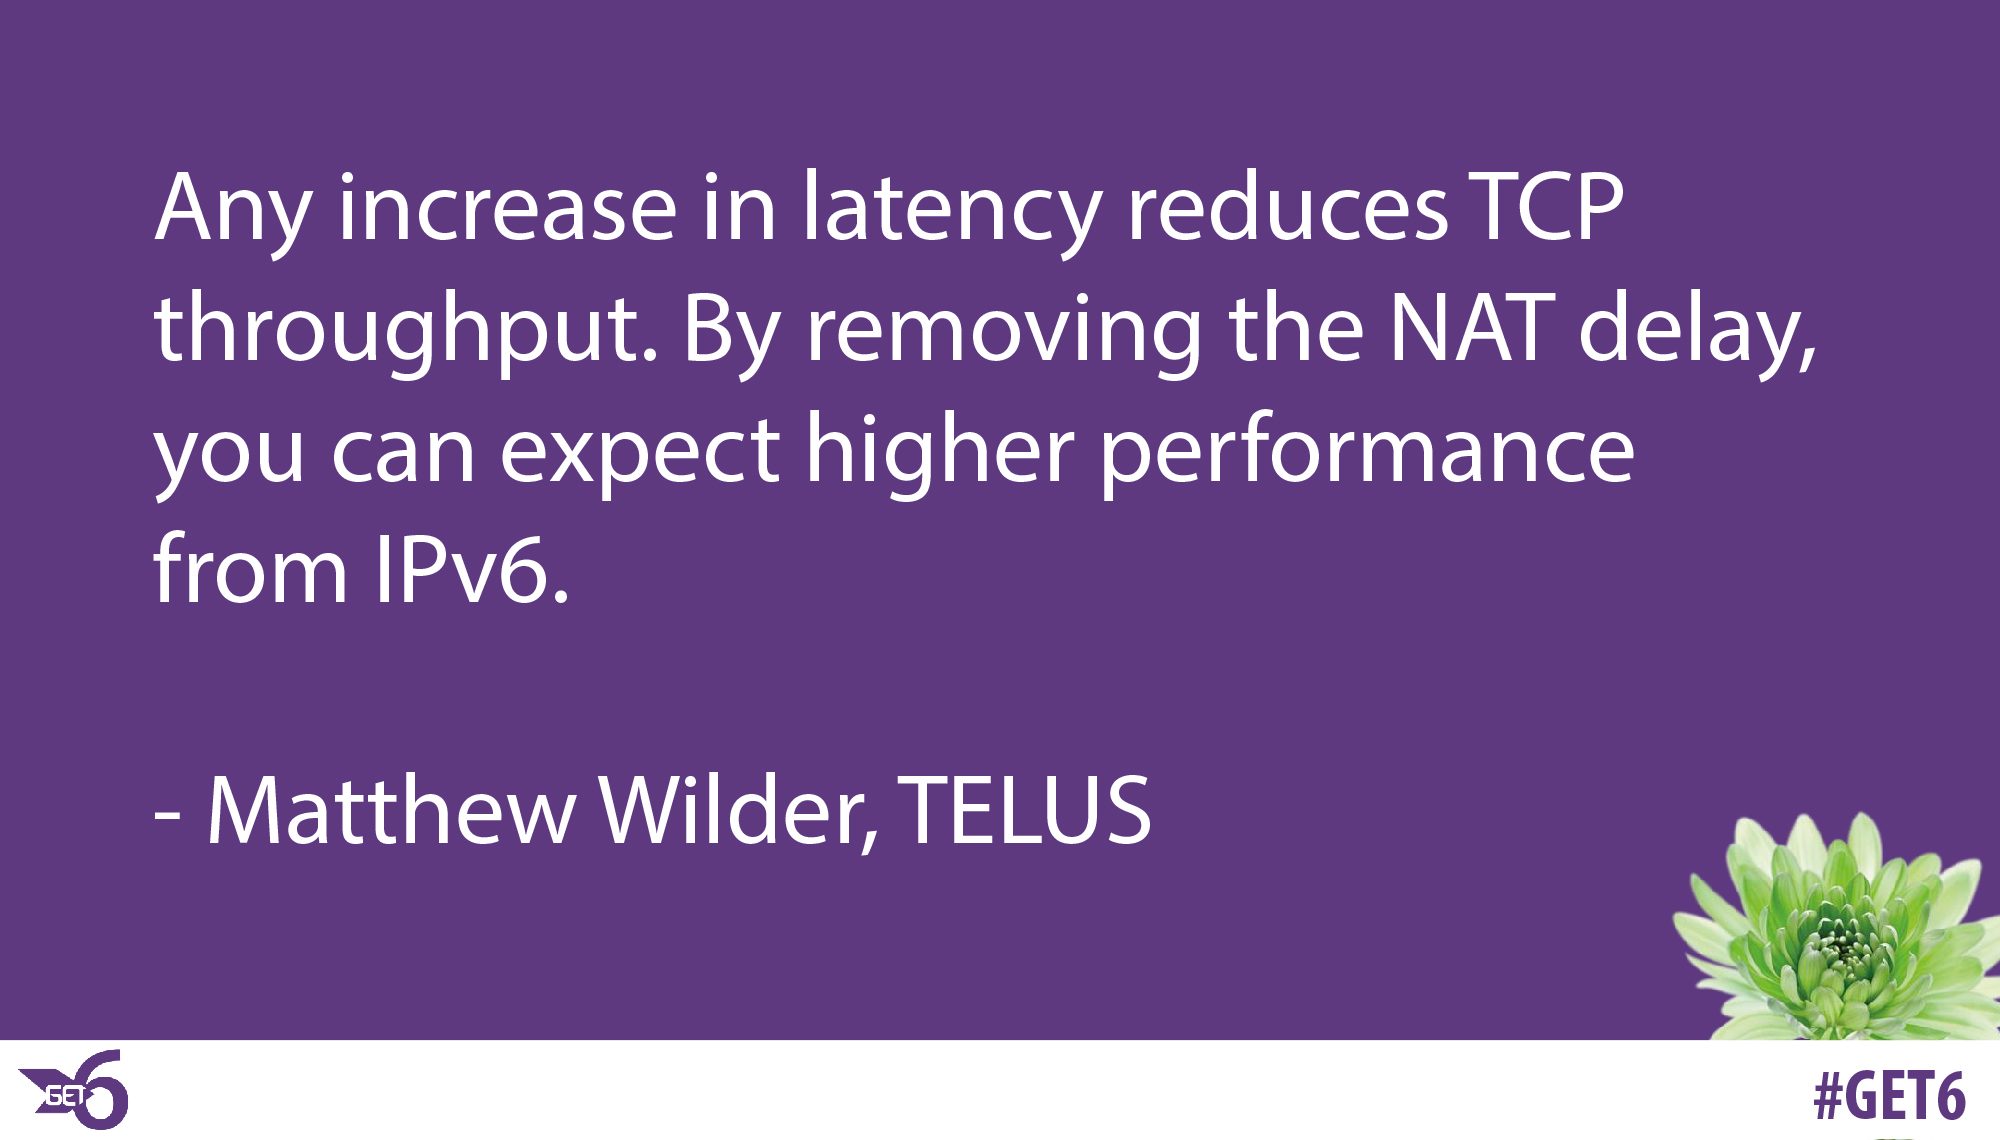 “any increase in latency reduces TCP throughput. By removing the NAT delay, you can expect higher performance from IPv6.”